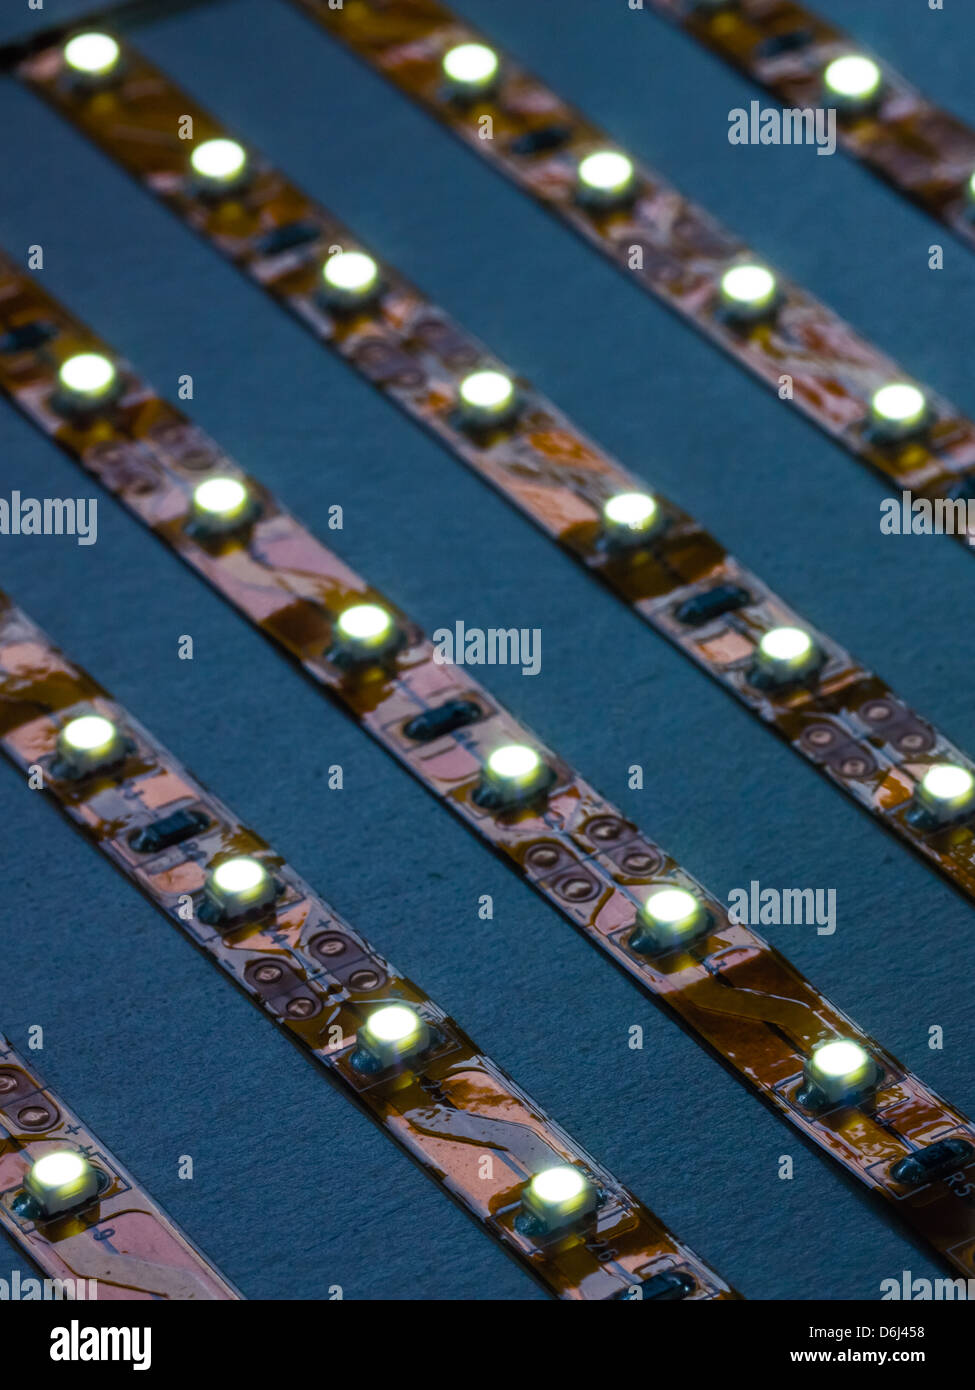 Close up of high intesity LED lighting strips illuminated with very narrow depth of field. Printed circuitry clearly seen. Stock Photo